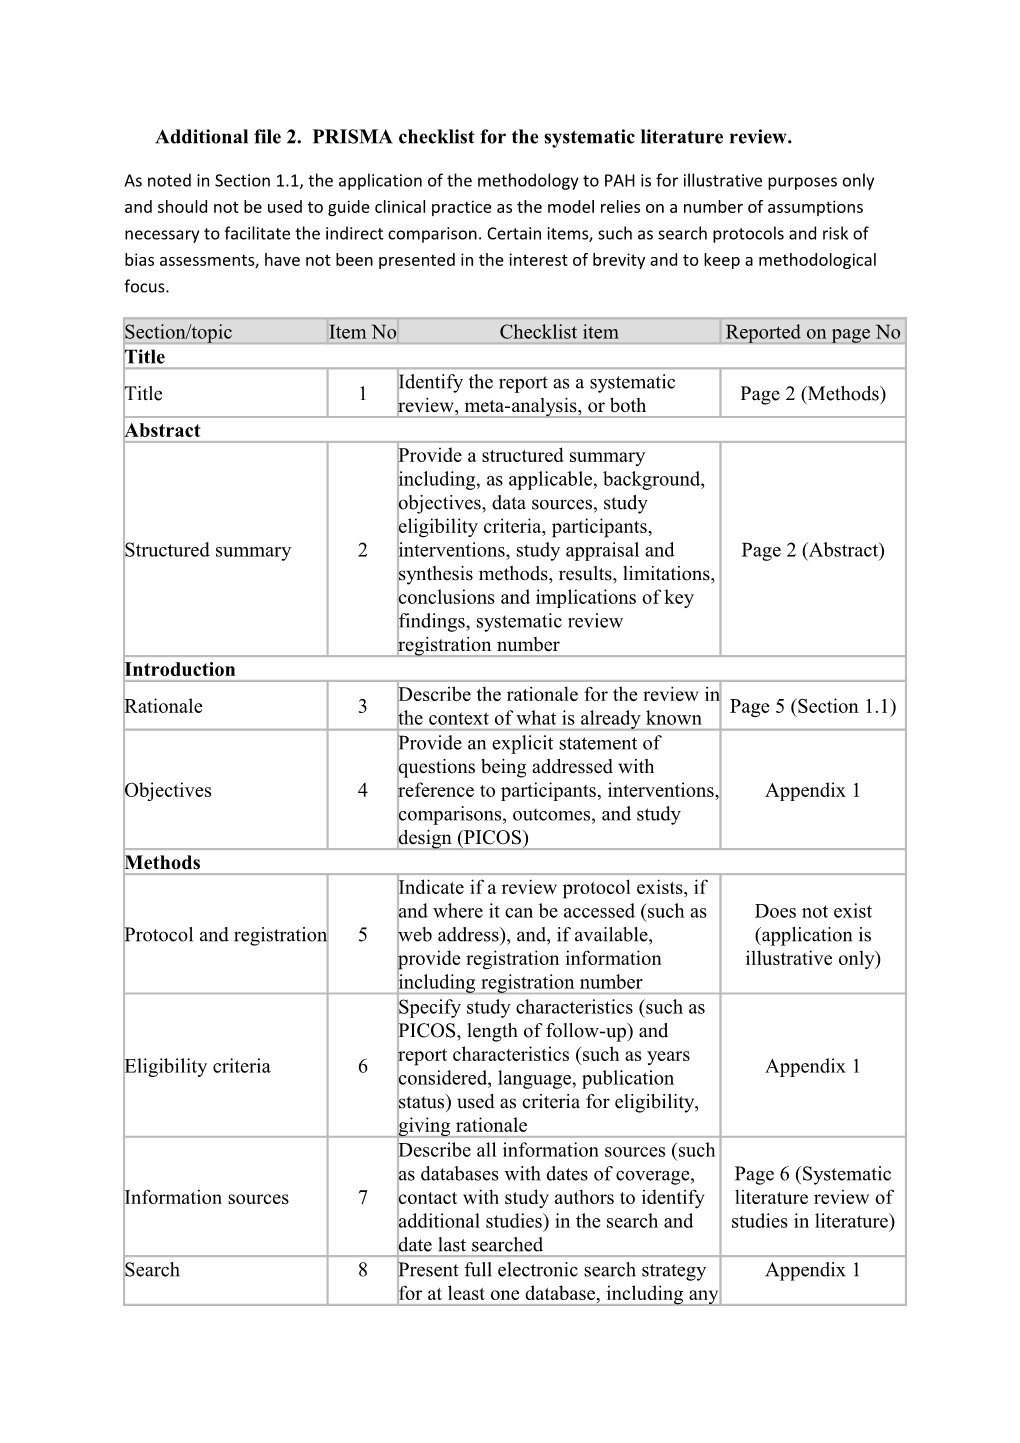 Additional File 2. PRISMA Checklist for the Systematic Literature Review